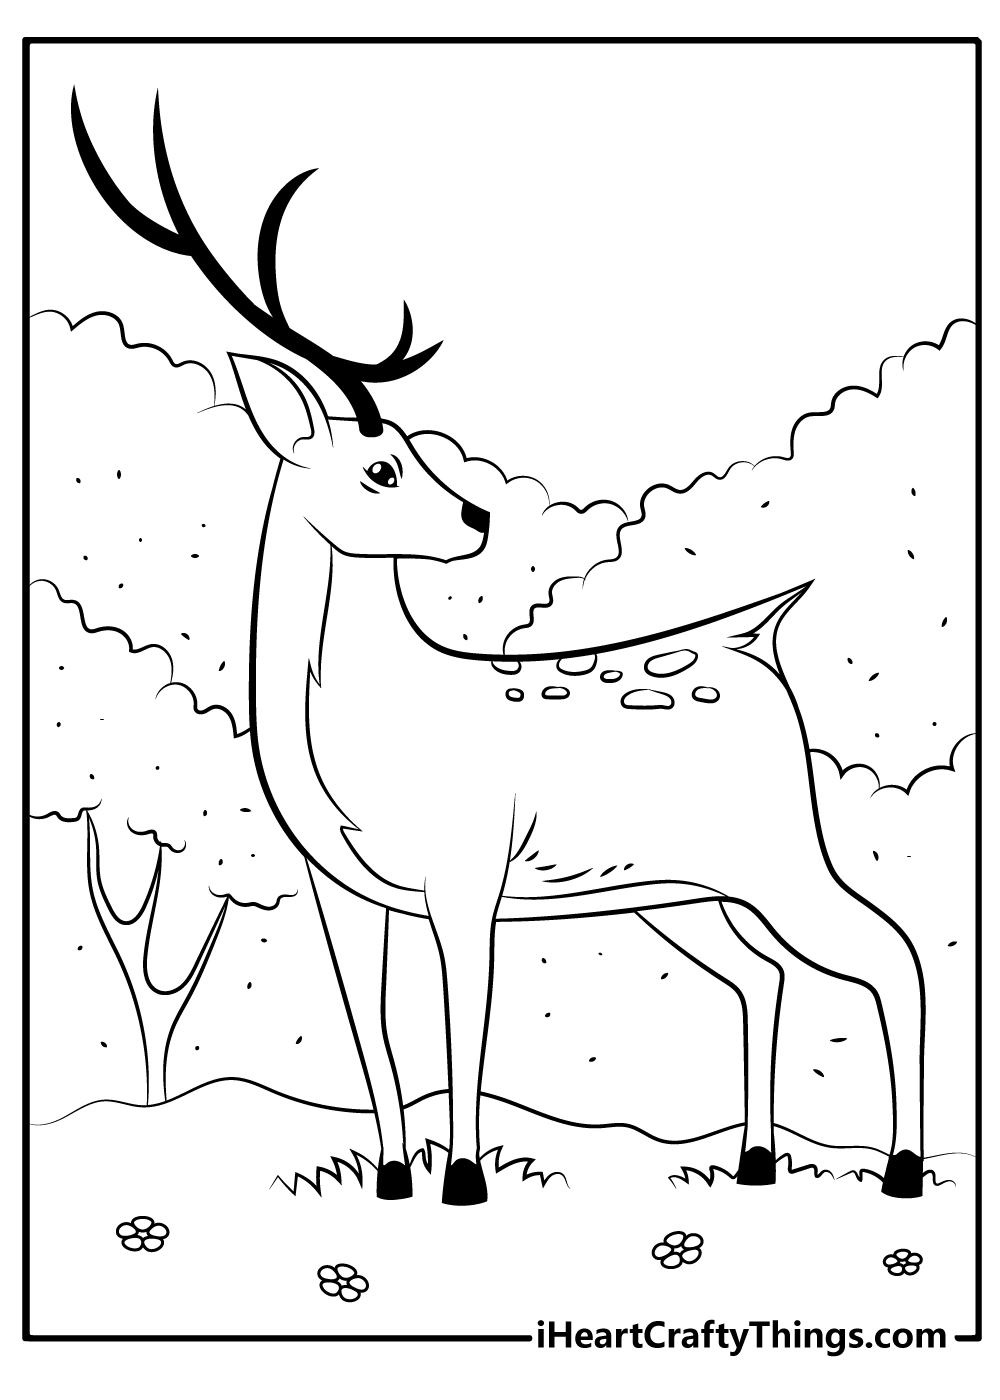 Deer Coloring Pages for adults free printable